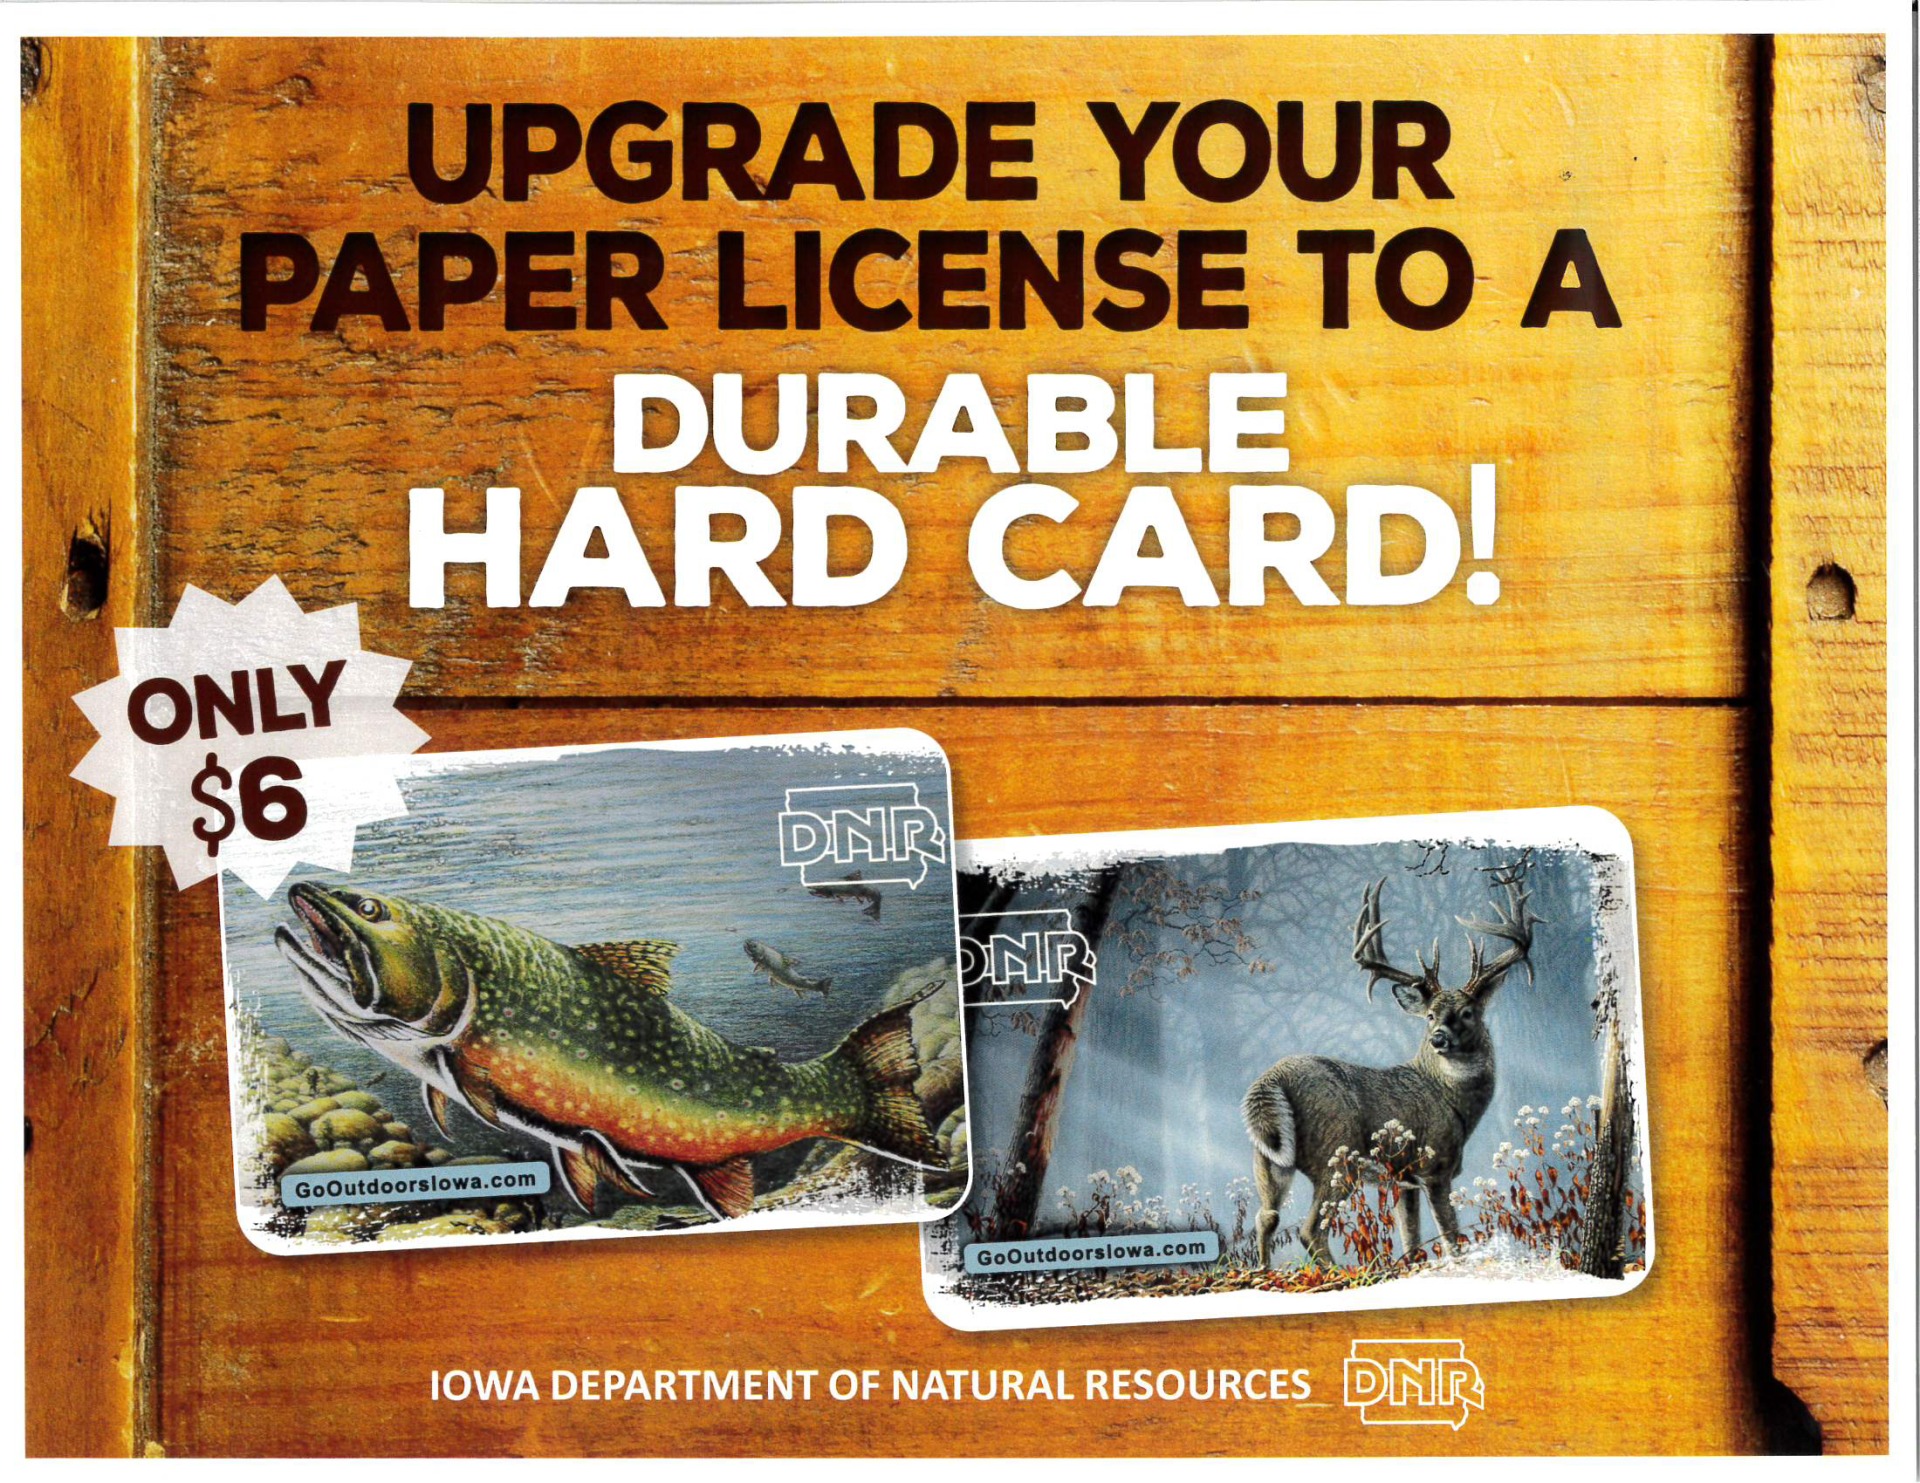 Upgrade your paper license to a durable card. Only $6.